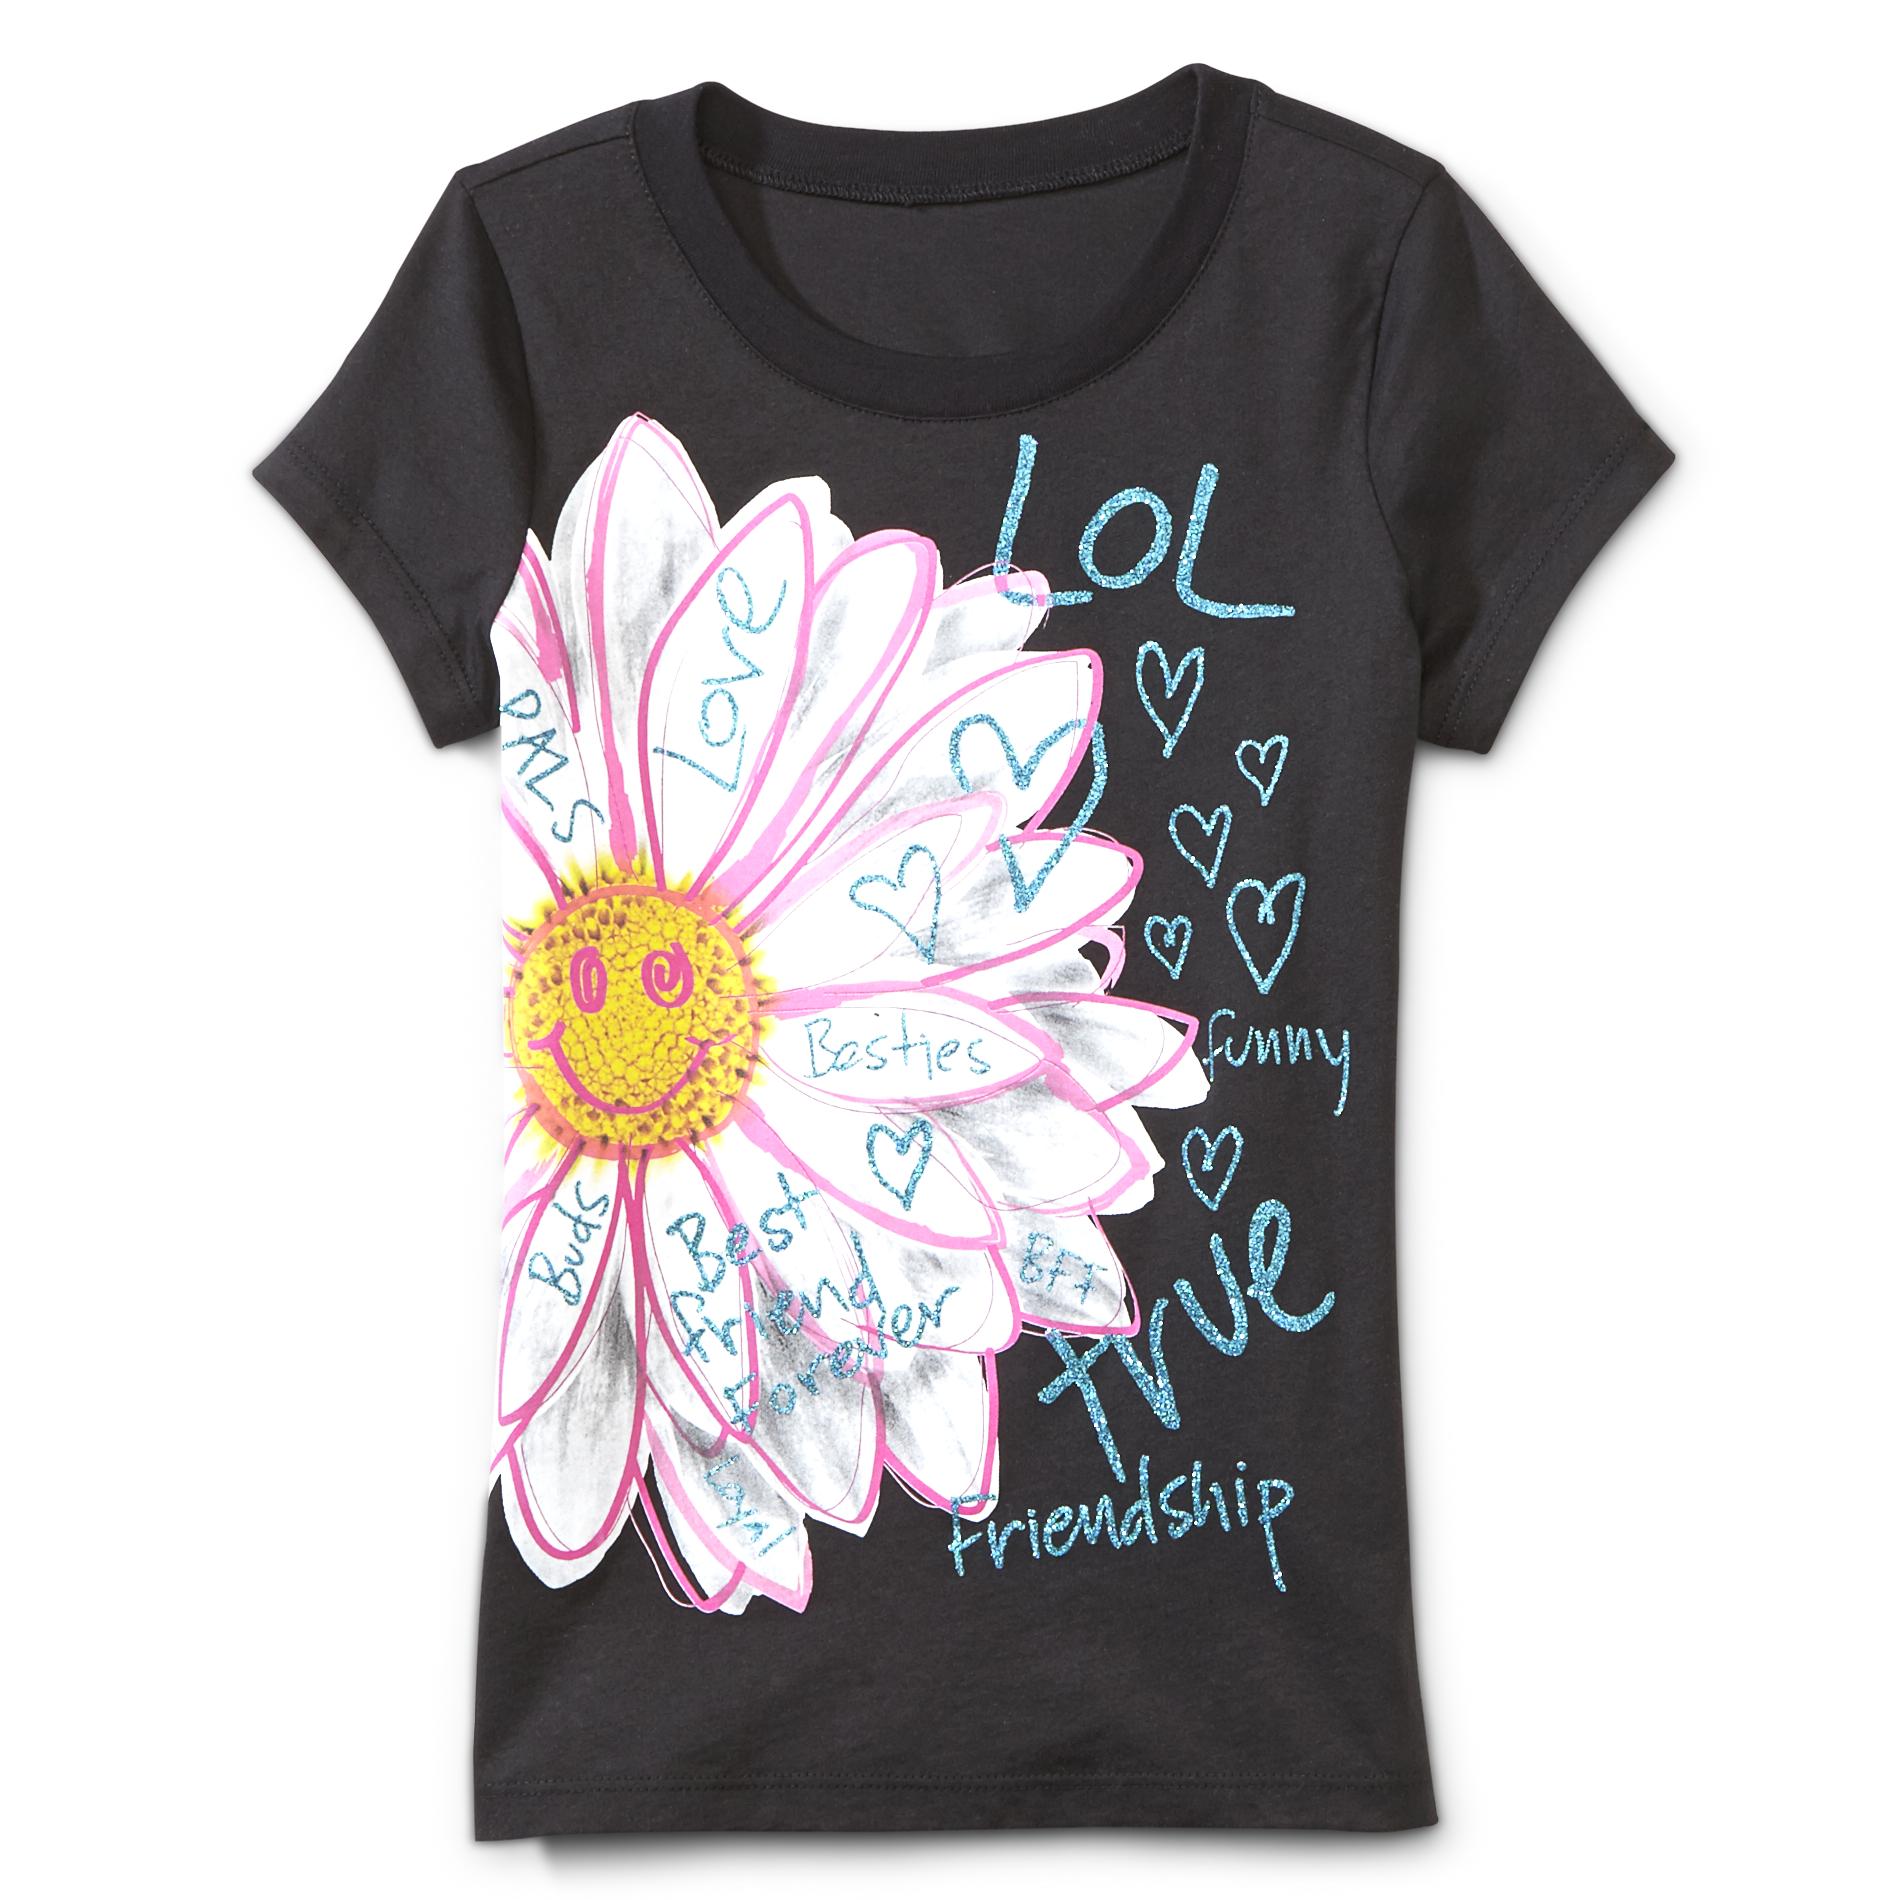 Route 66 Girl's Graphic T-Shirt - Flower